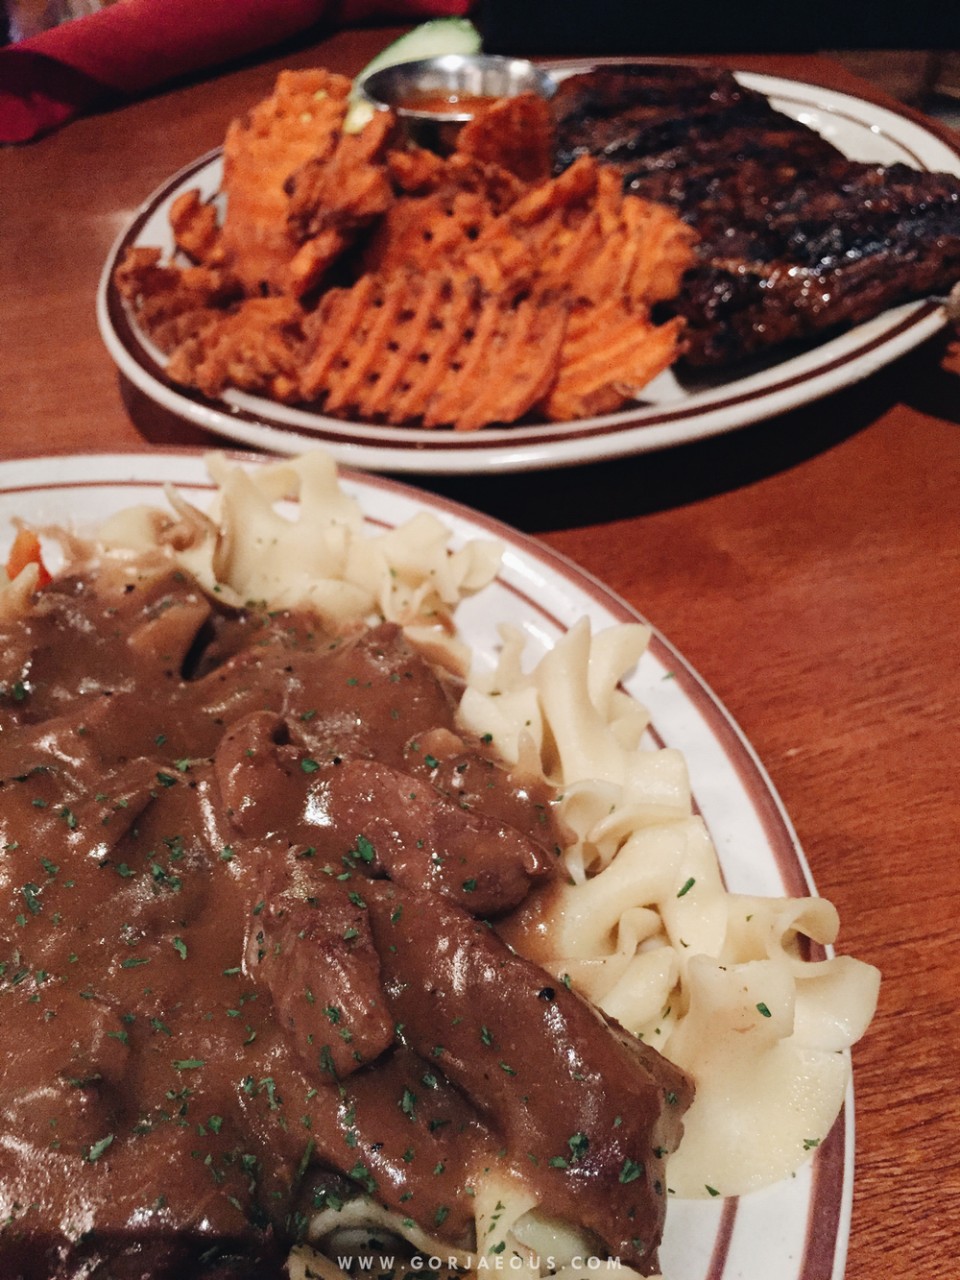  I know I said I haven't had beef in weeks, but I couldn't NOT have this  Beef Stroganoff ! YUM! 